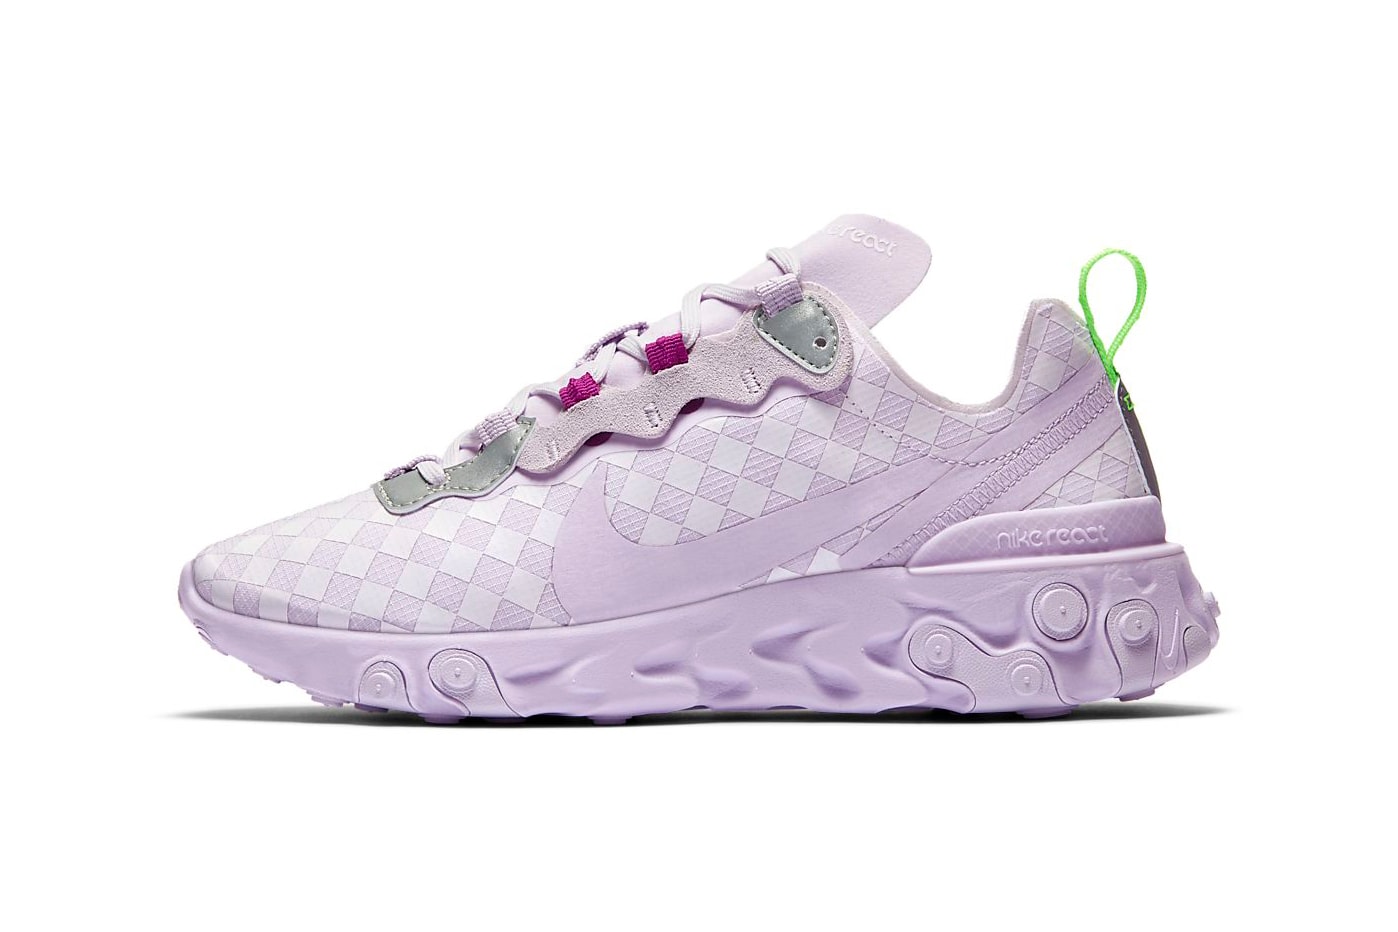 Nike React Element 55 Barely Grape Lilac Pastel Lavender Purple Sneakers Trainers